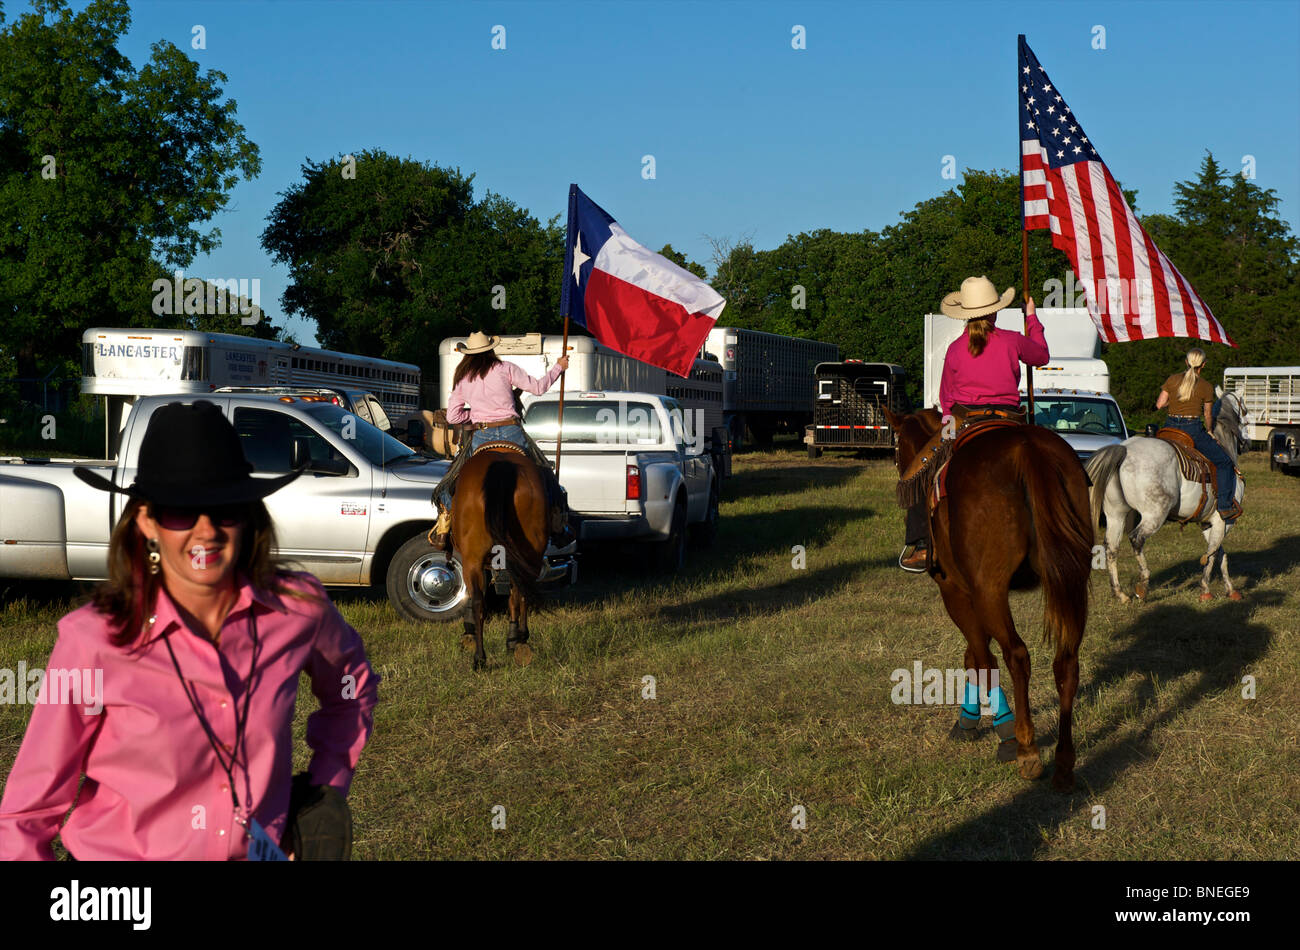 Cowgirls waving flag in stockyard on opening ceremony of PRCA rodeo event in Texas, USA Stock Photo